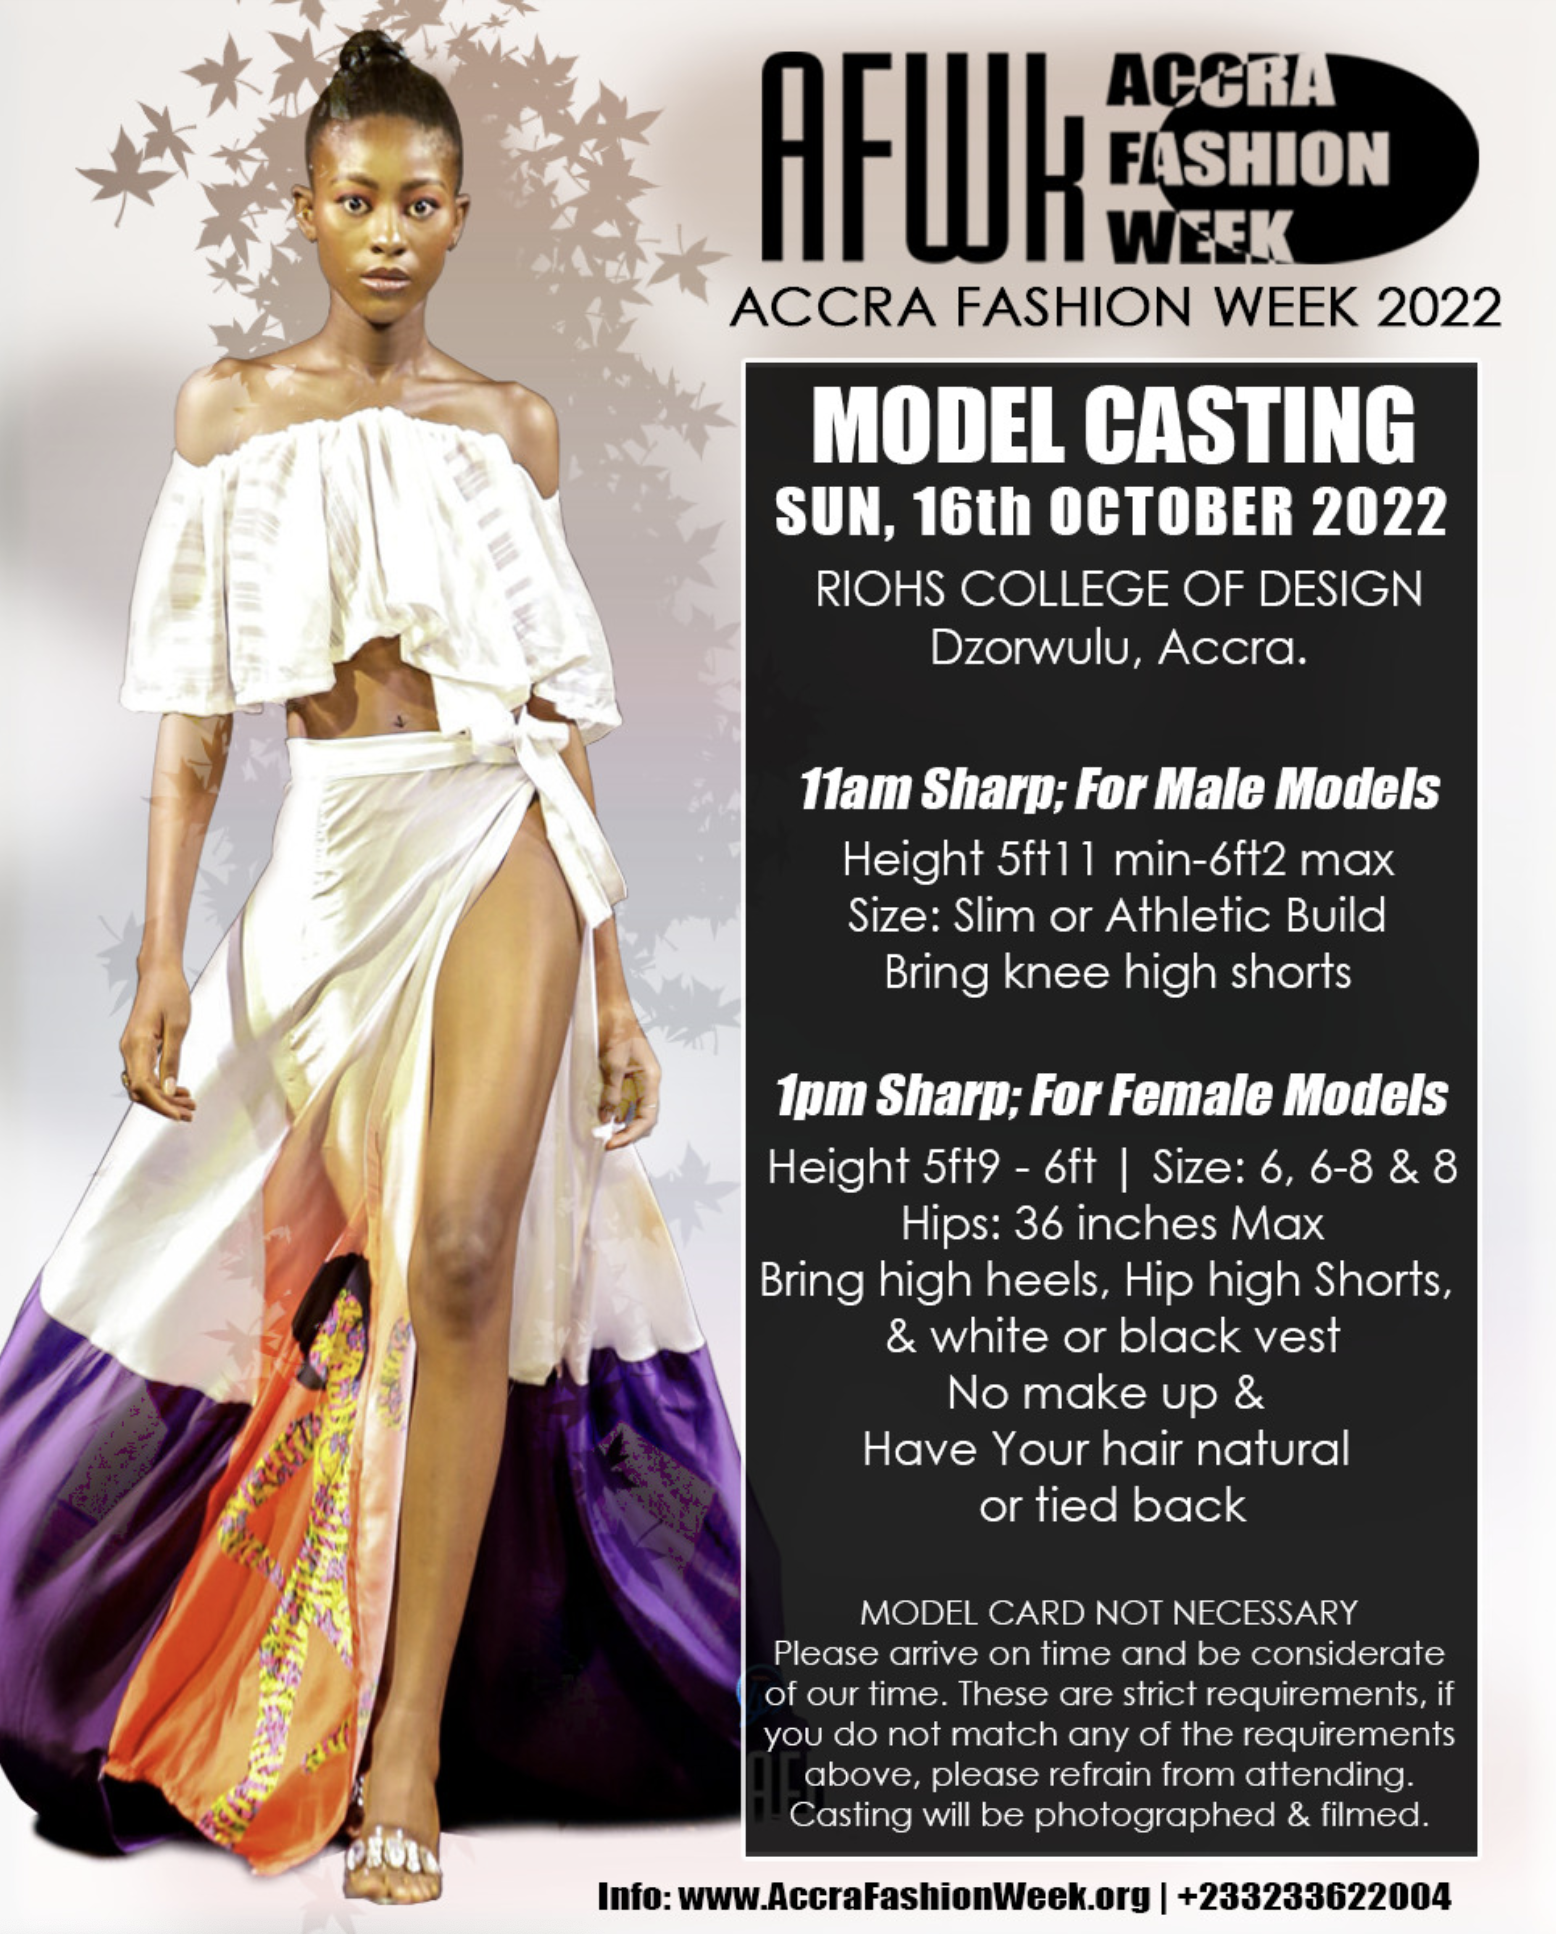 Accra Fashion Week (AFWk'22) model casting call scheduled for October 16 |  STYLEAFRIQUE•com